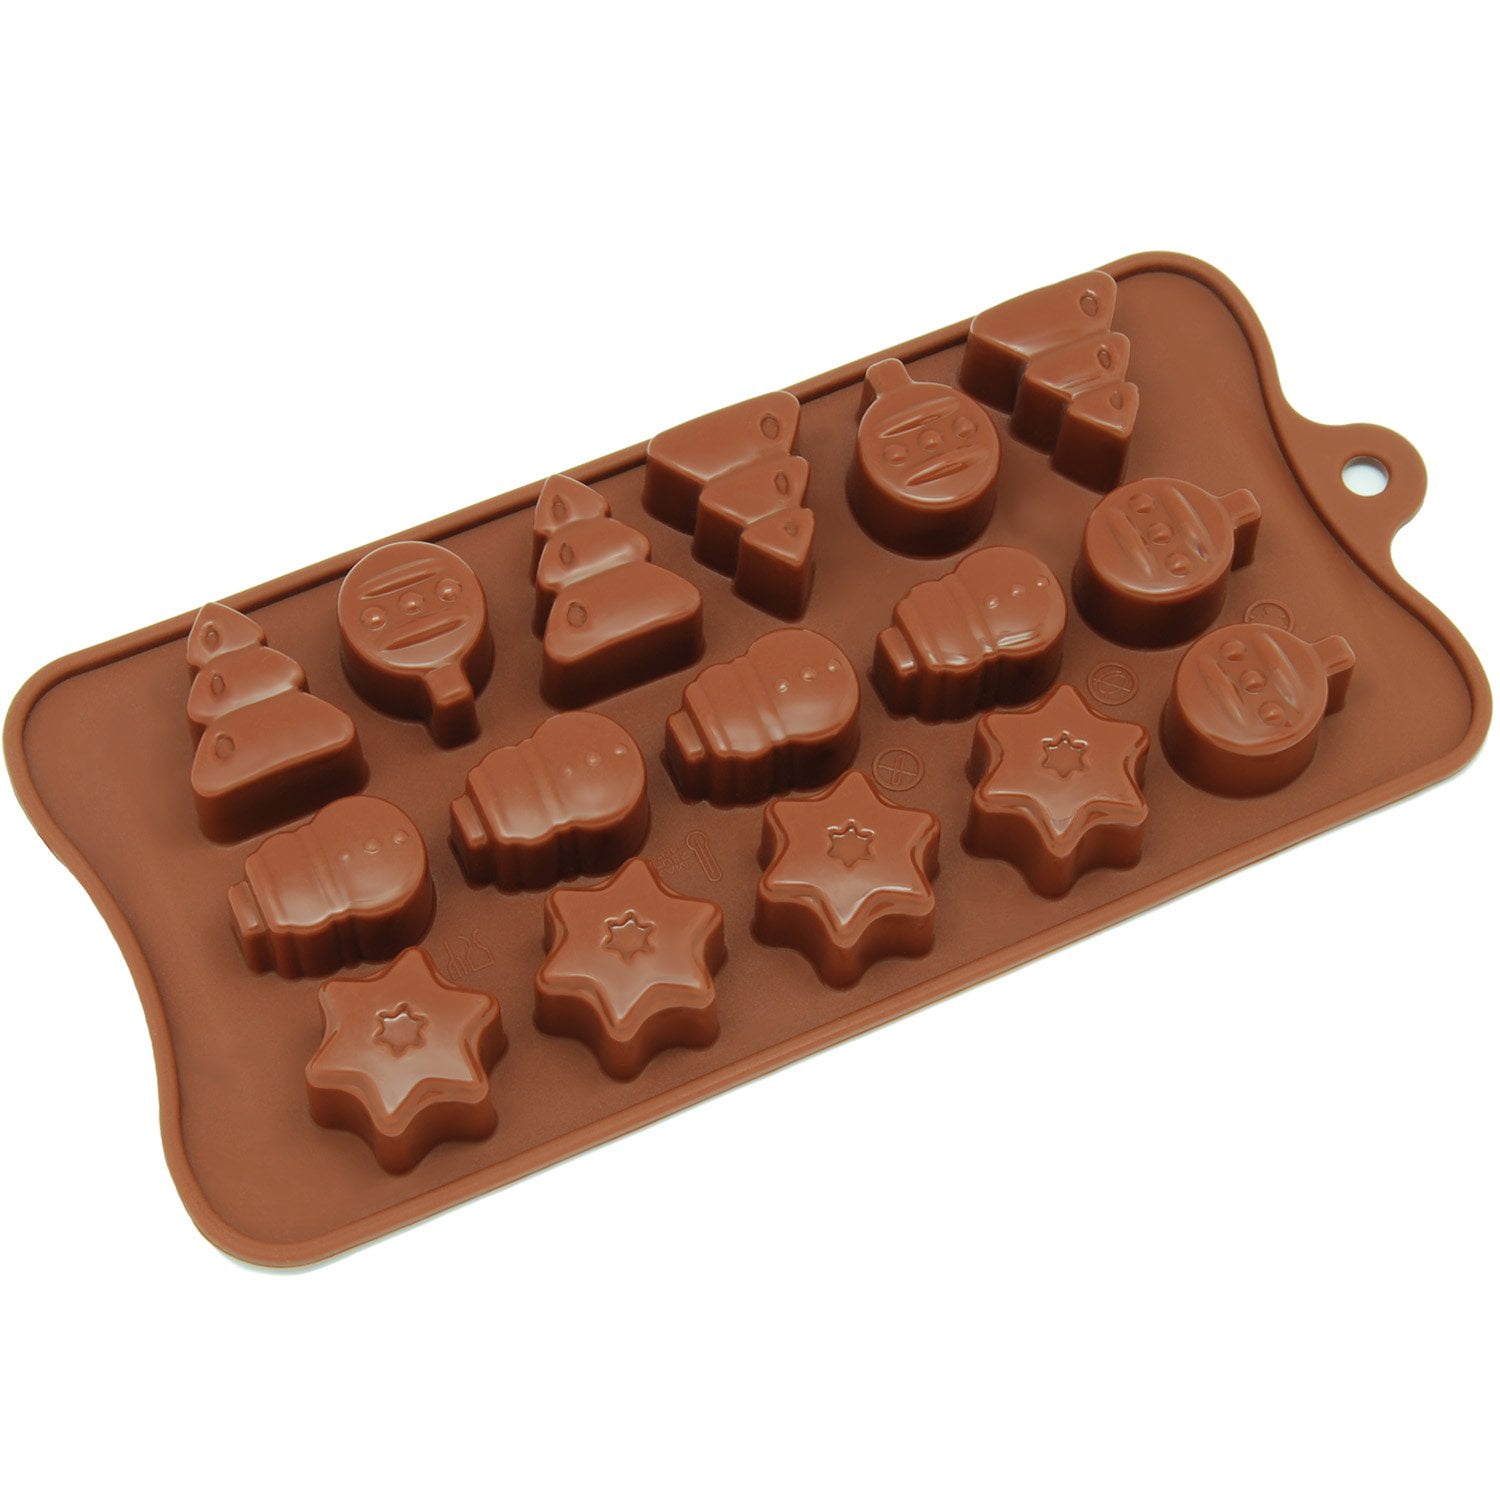 Silicone Chocolate Candy Molds - Non Stick, BPA Free, Reusable 100% Silicon  & Dishwasher Safe Silicon - Kitchen Rubber Tray For Ice, Crayons, Fat Bombs  and Soap Molds (Christmas [16 Cup]) 